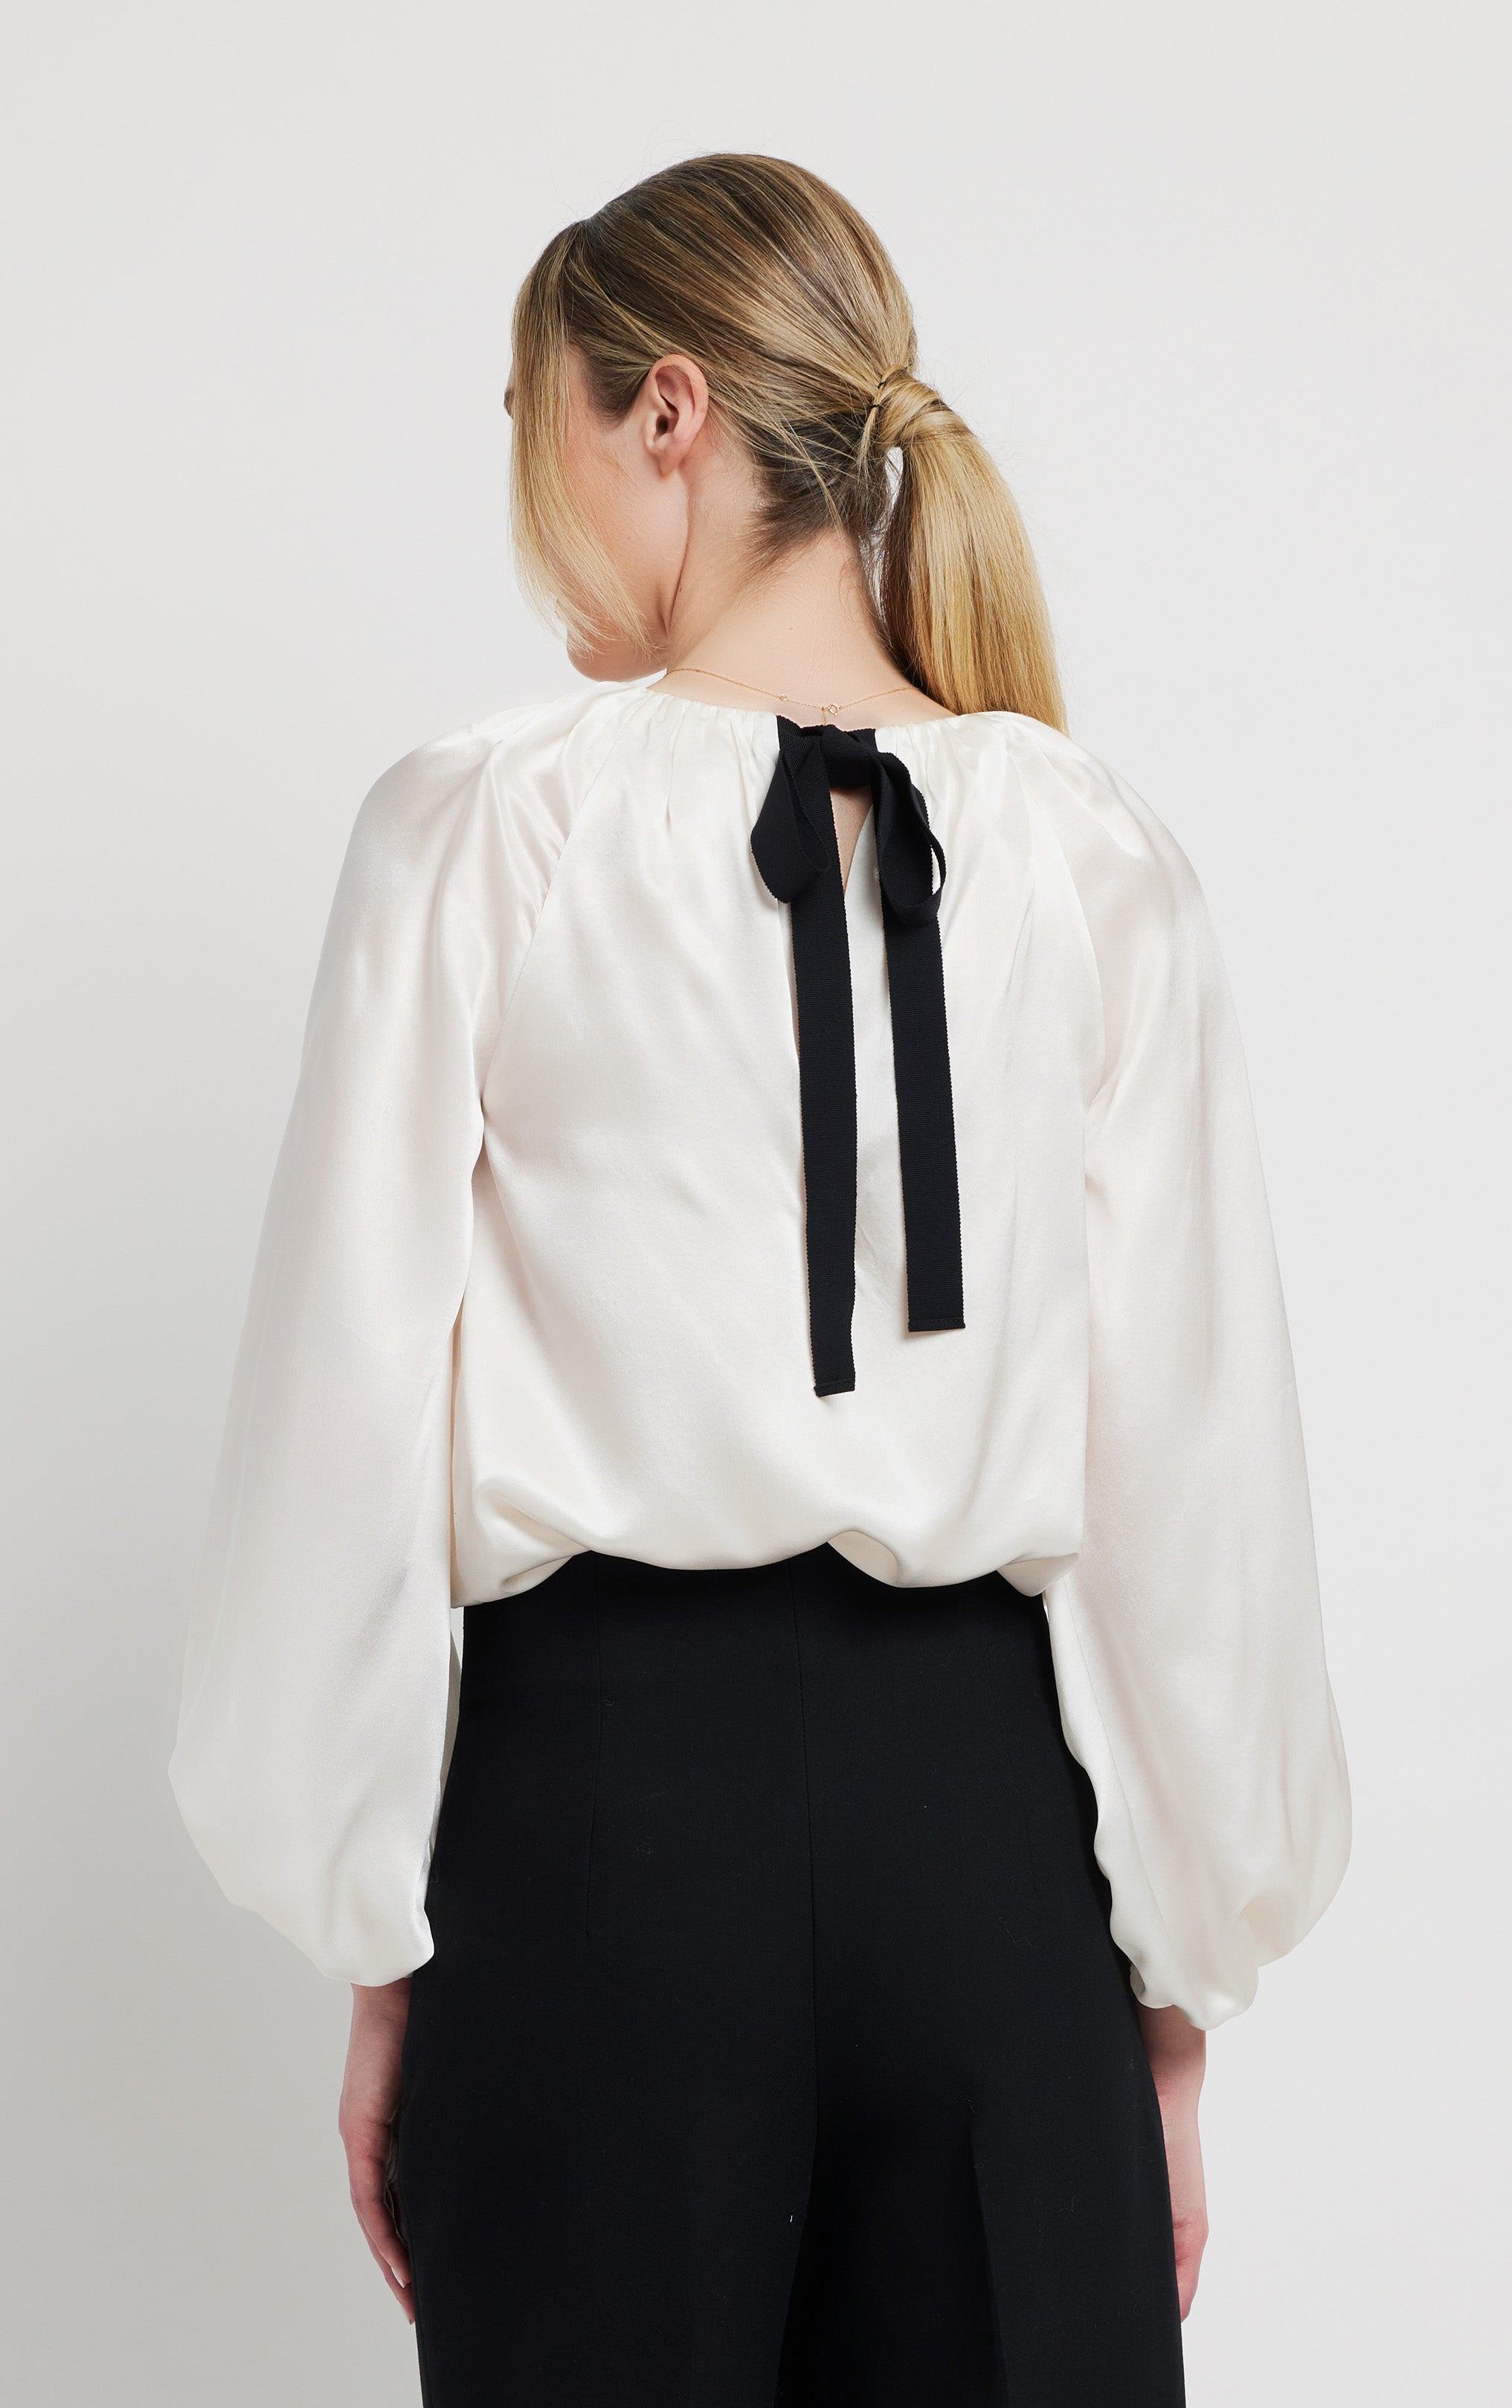 back profile view of woman wearing silk white top with rusched neck and puff sleeve opening